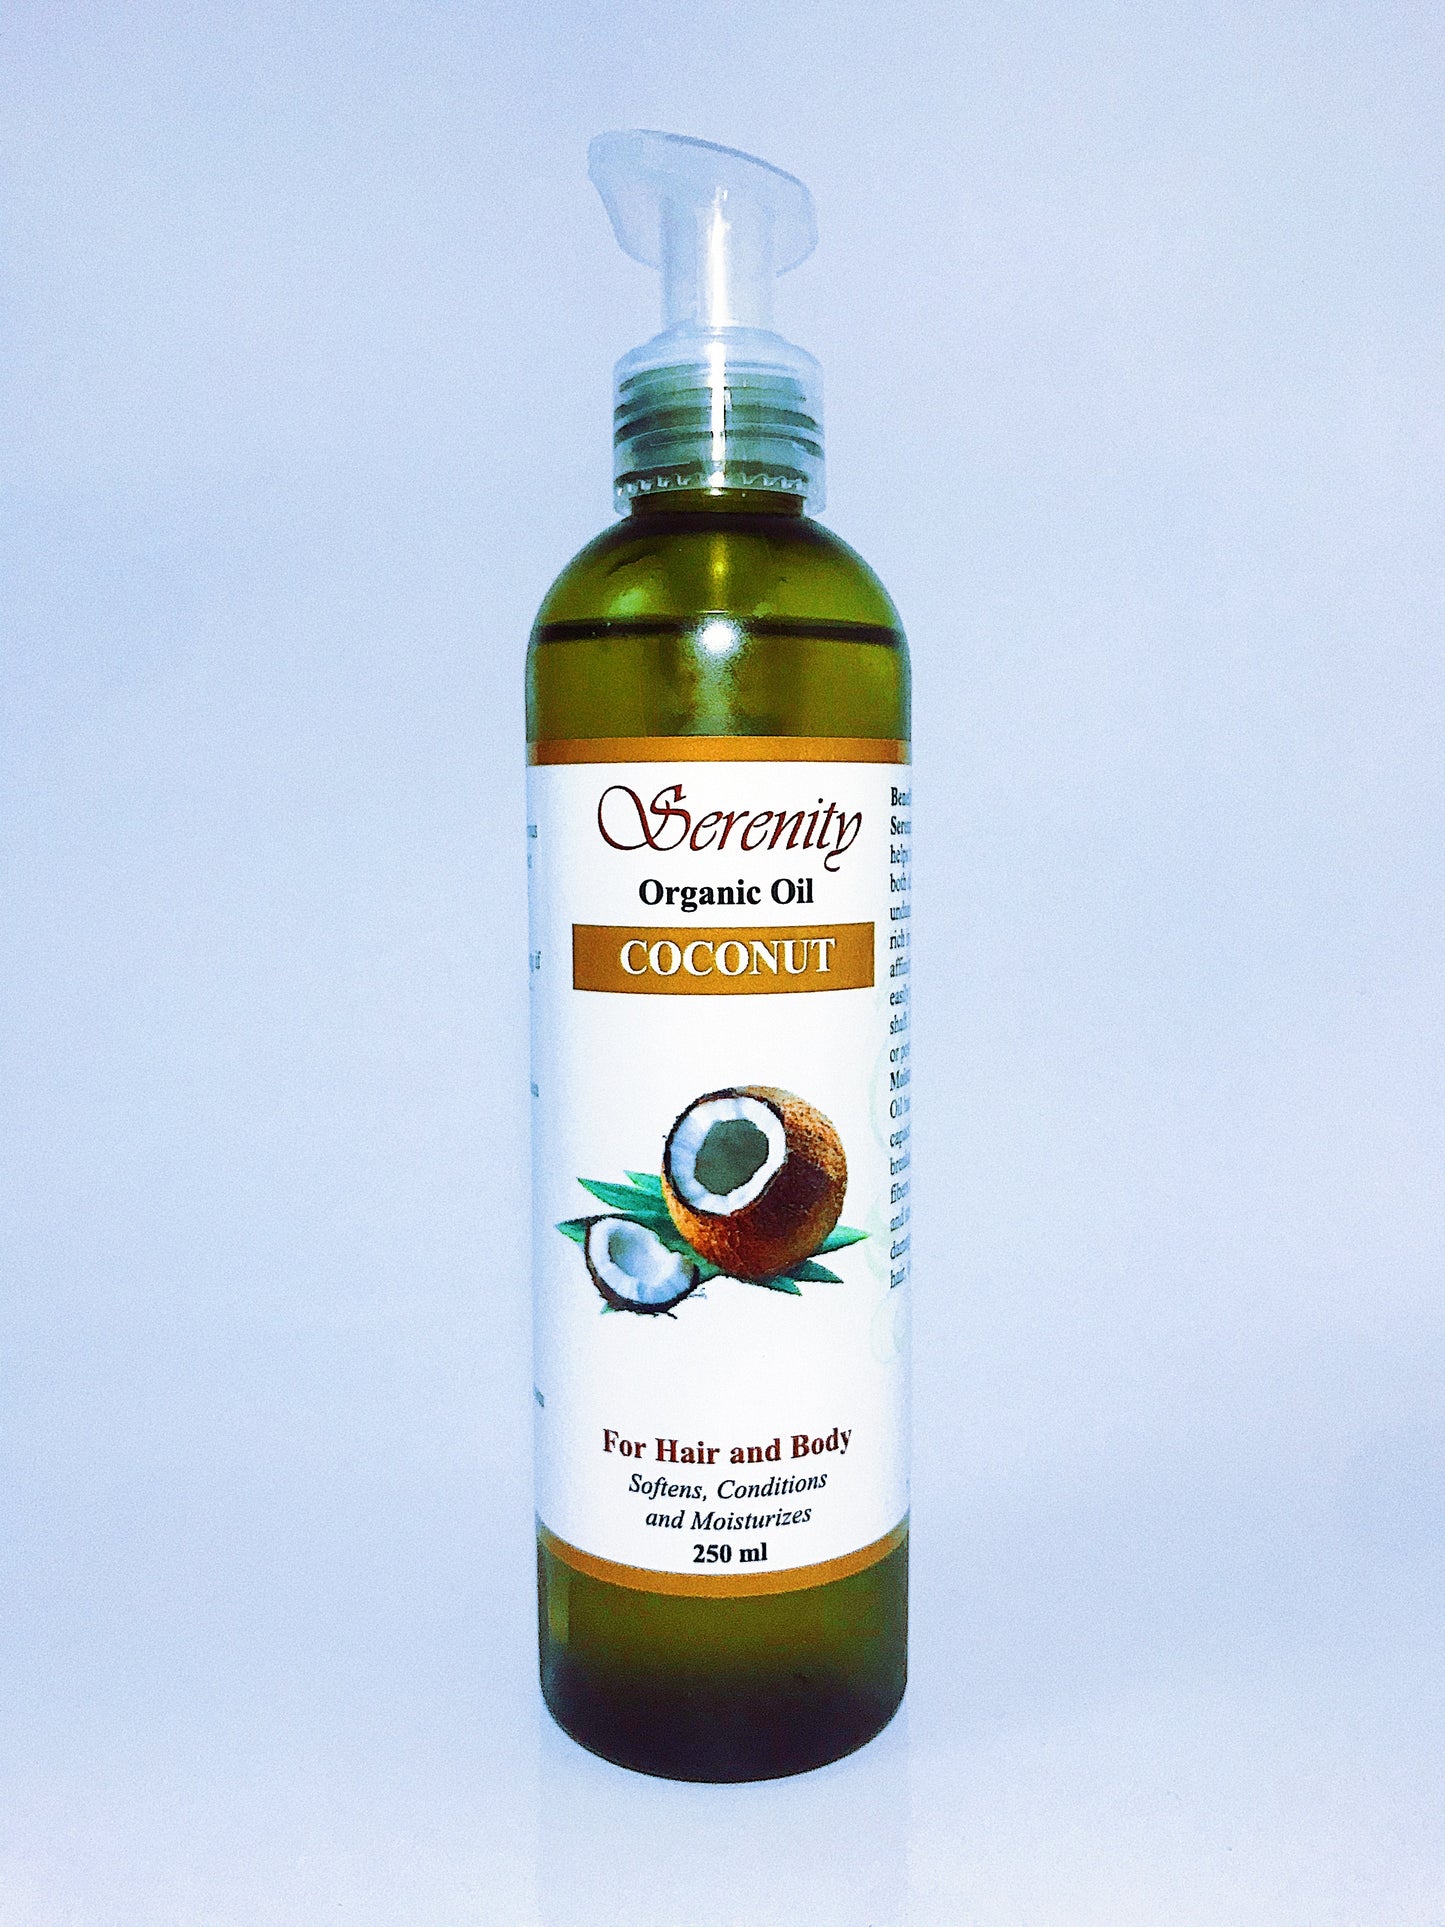 Serenity-Organic-Oil-Coconut-for-Hair-and-Body.jpg